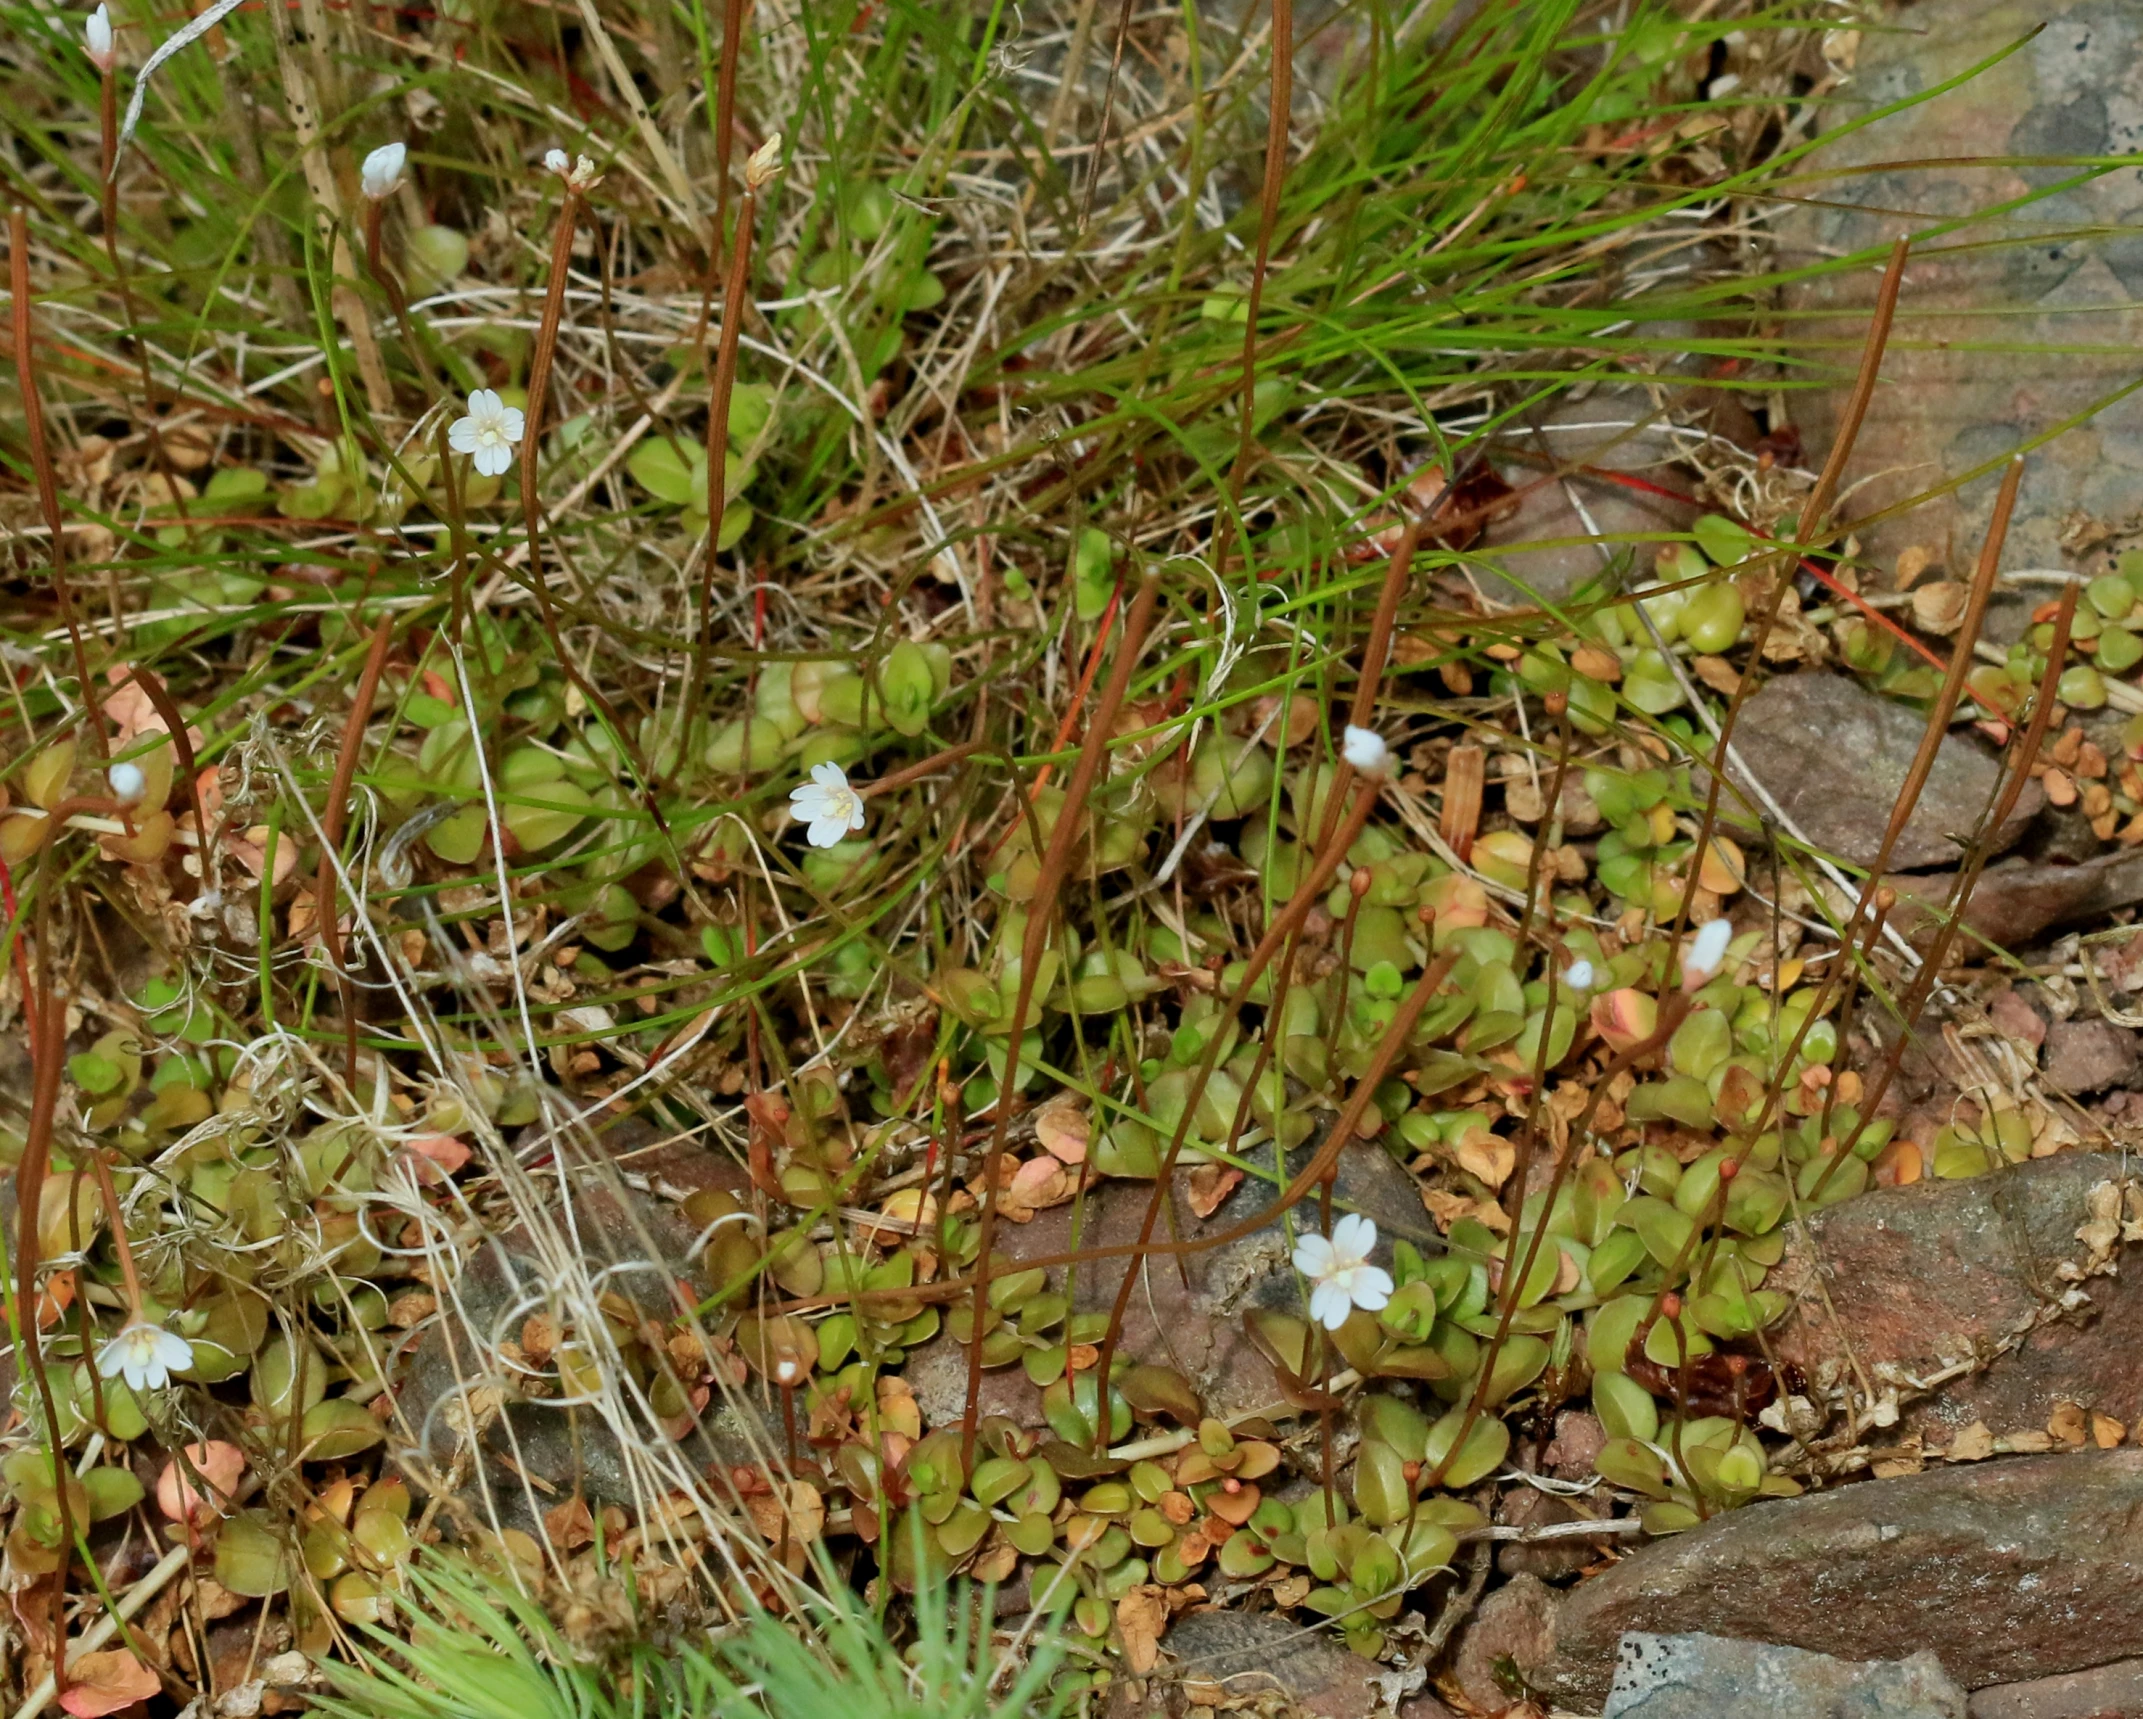 green and white flowers growing near rocks on the ground